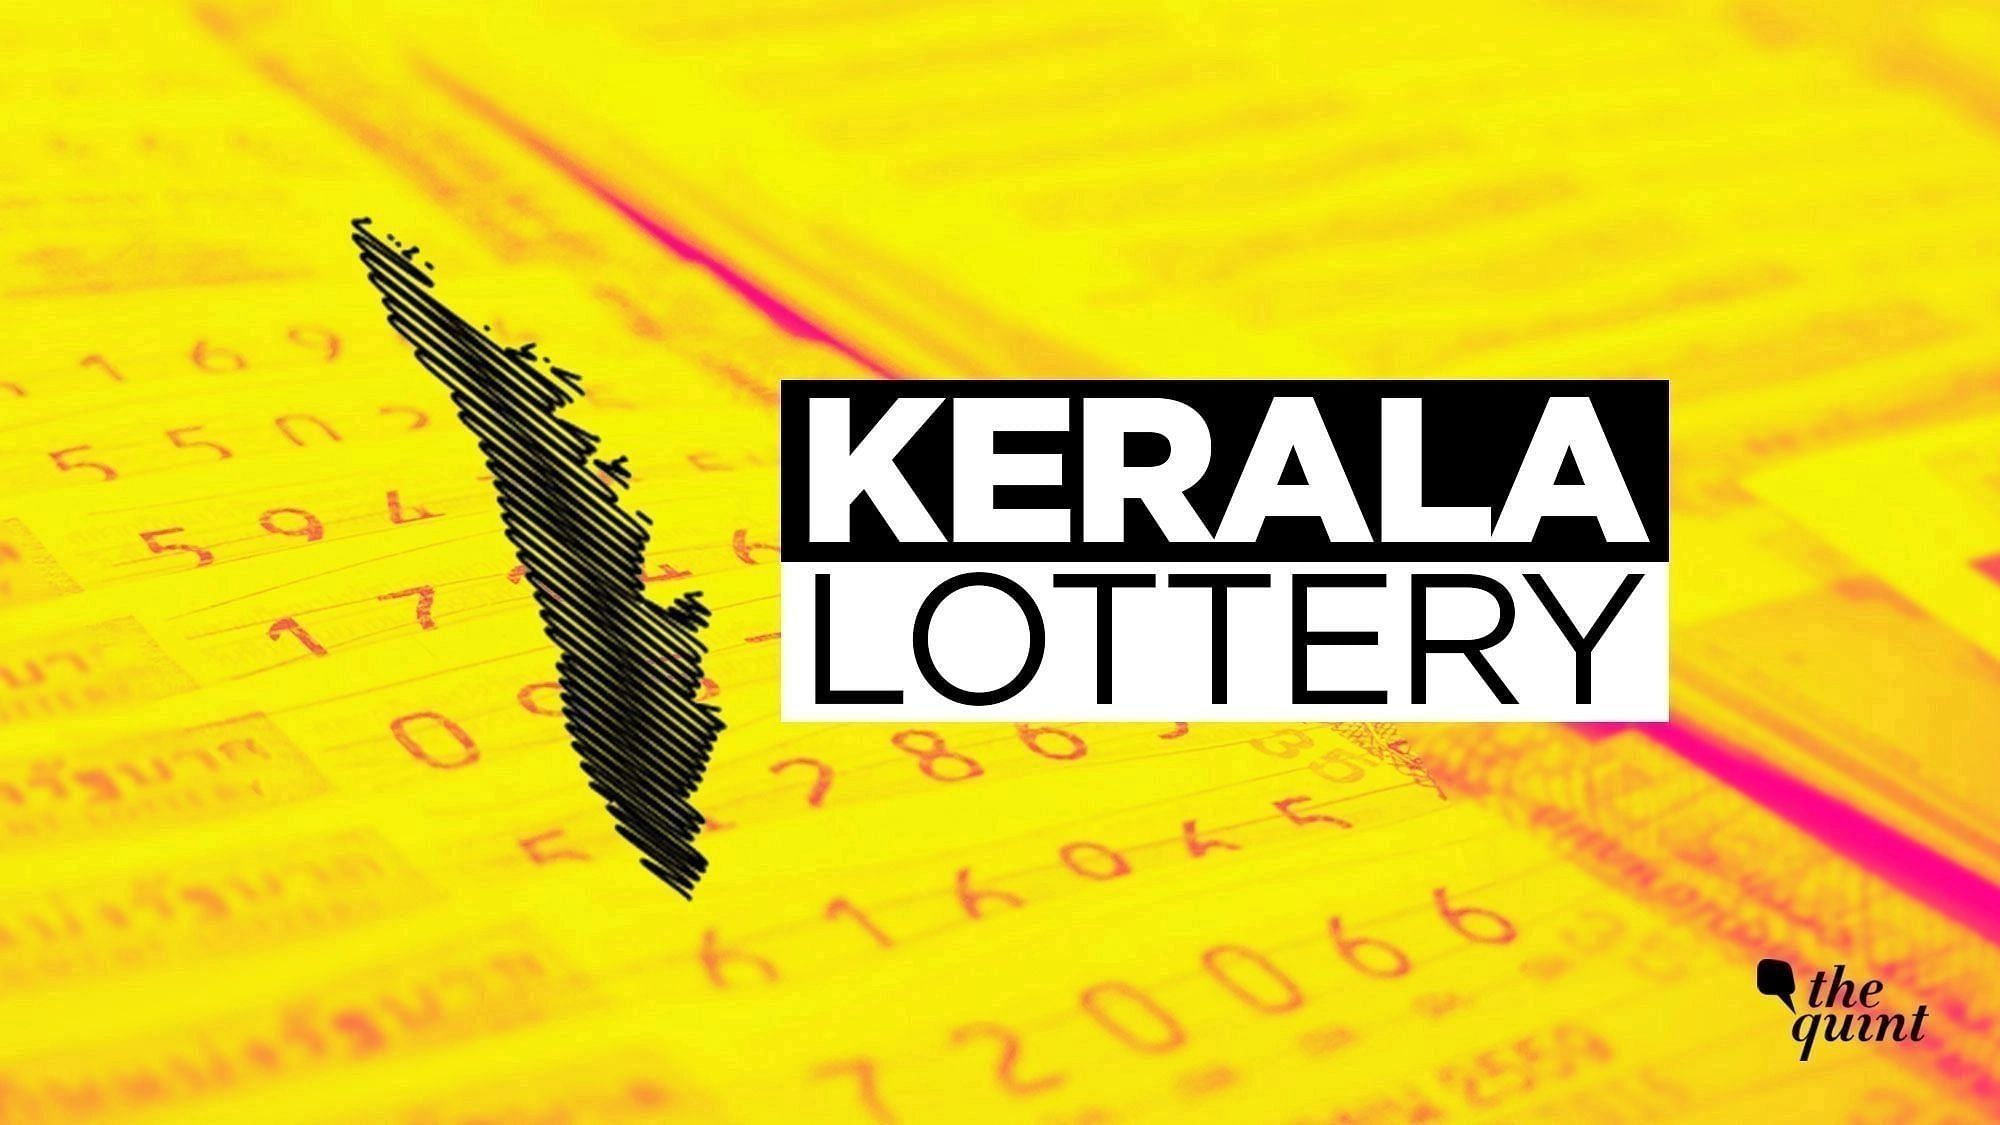 <div class="paragraphs"><p>Kerala Lottery NIRMAL(NR-302) Result and prize money for Friday, 11 November 2022 is mentioned here.</p></div>